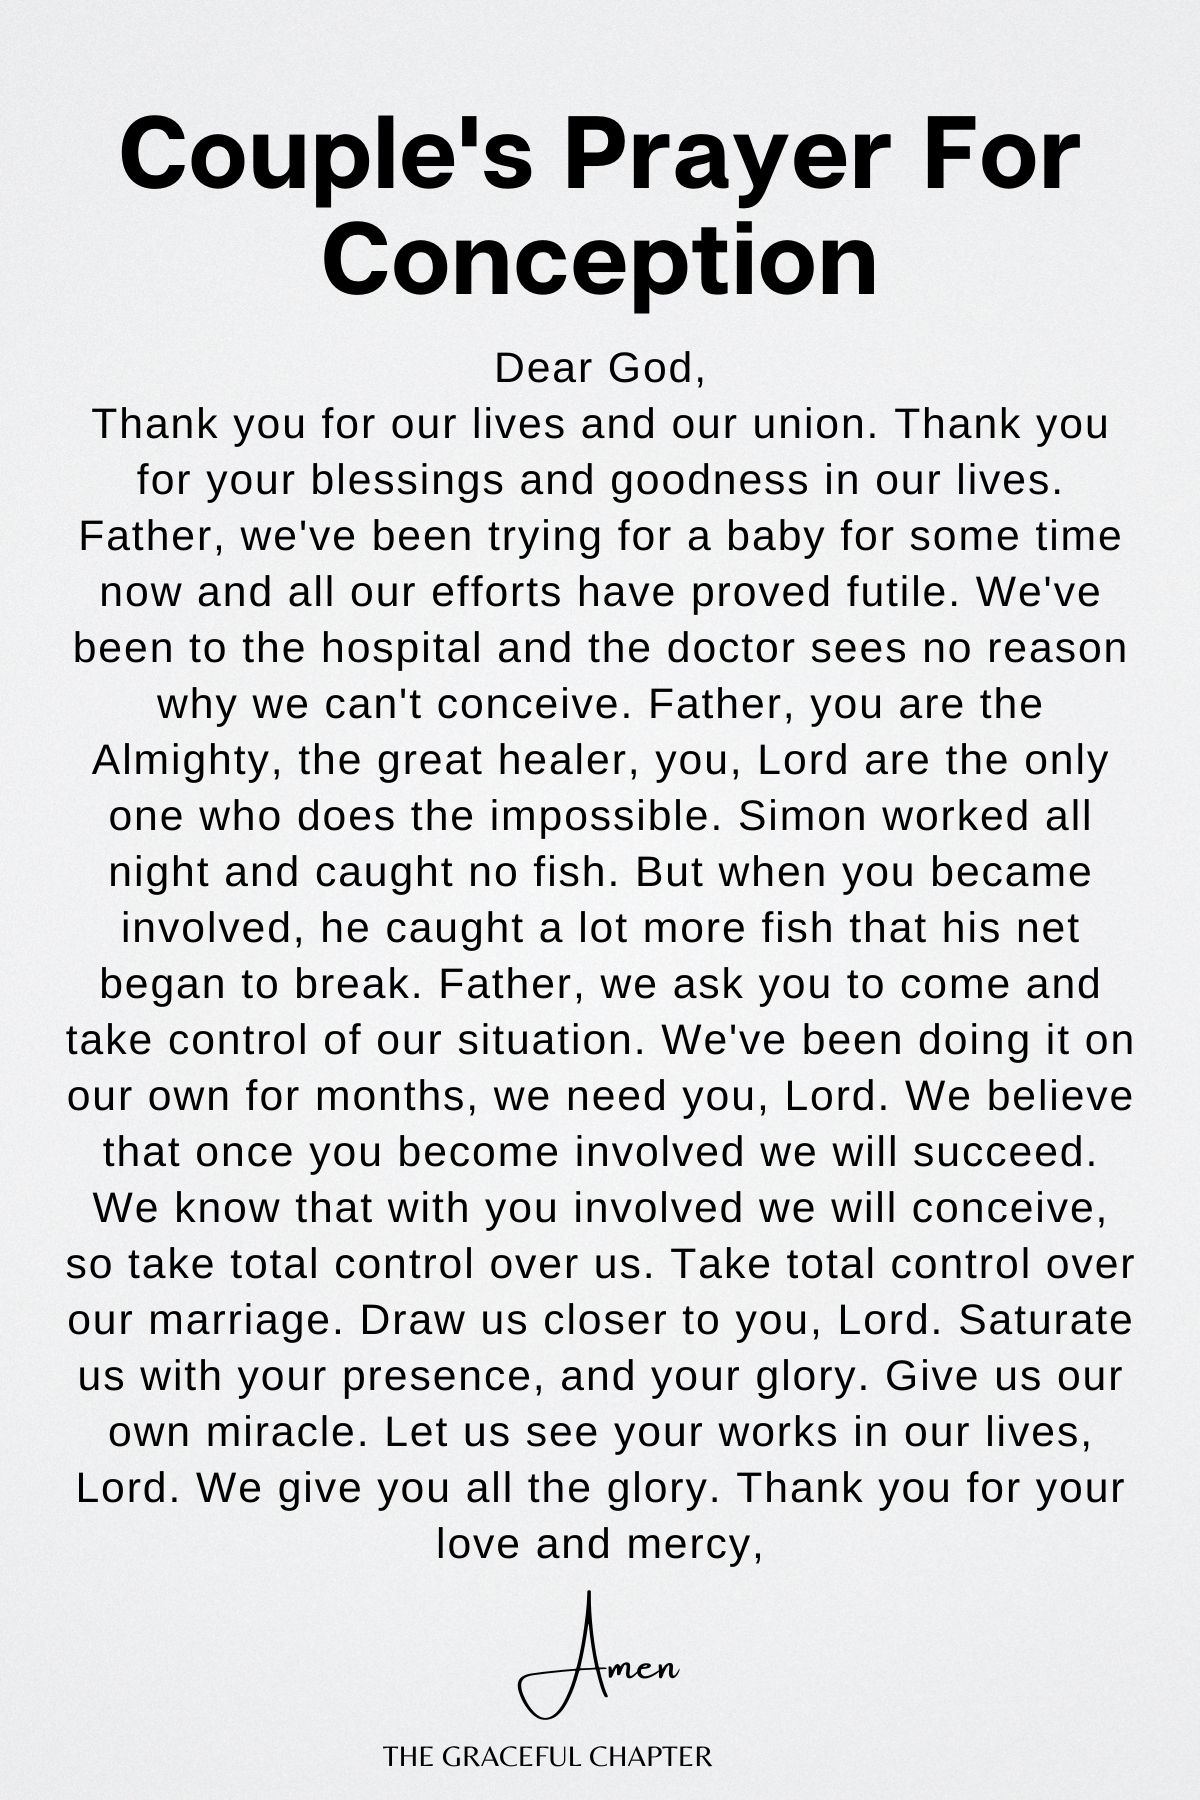 Couple's prayer for conception